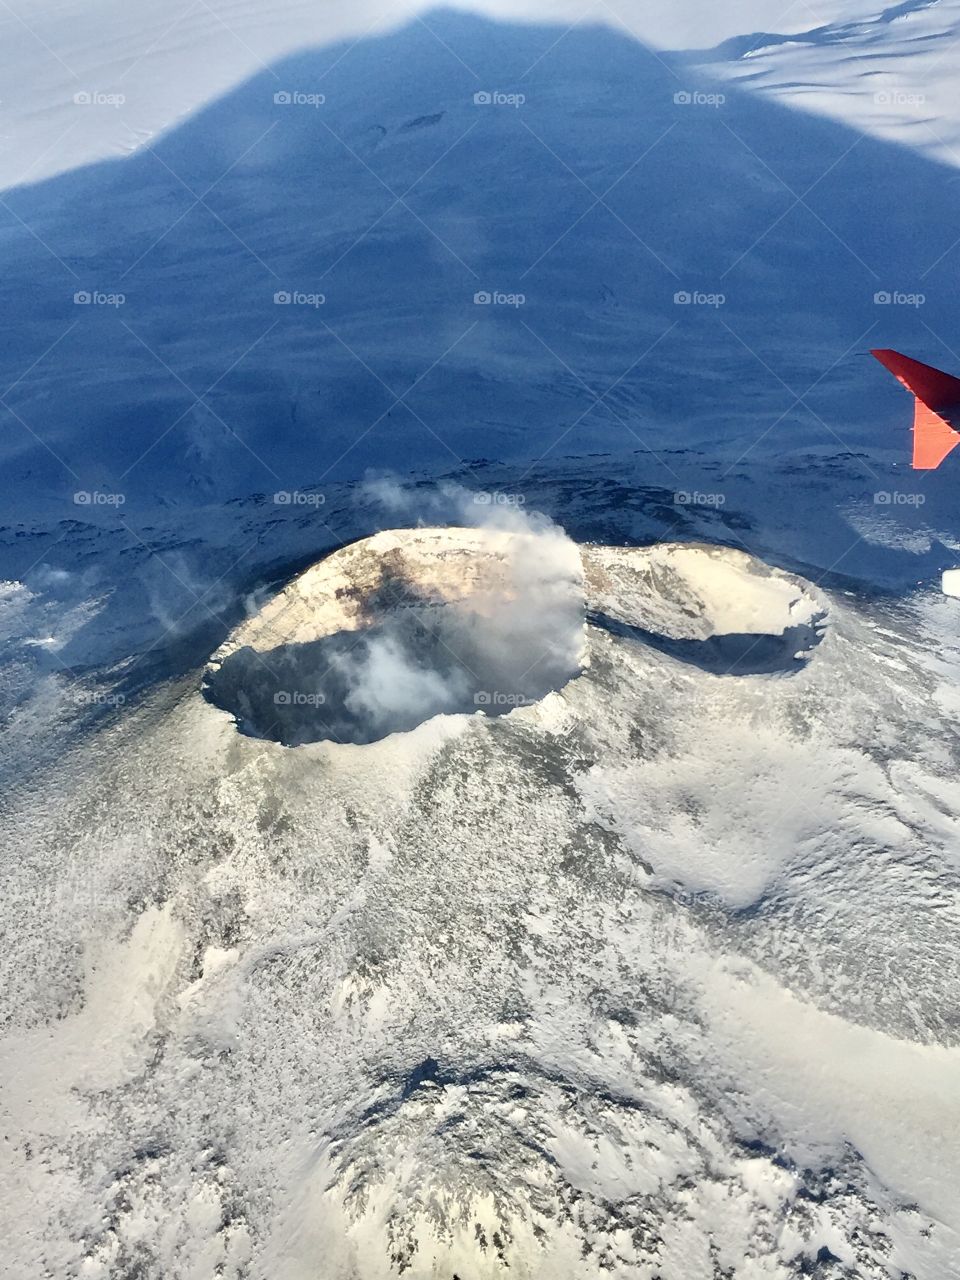 Mount Erebus volcano off-steaming, as seen from Sky Traders Australian A319 Airbus, Ross Island, Antarctica.